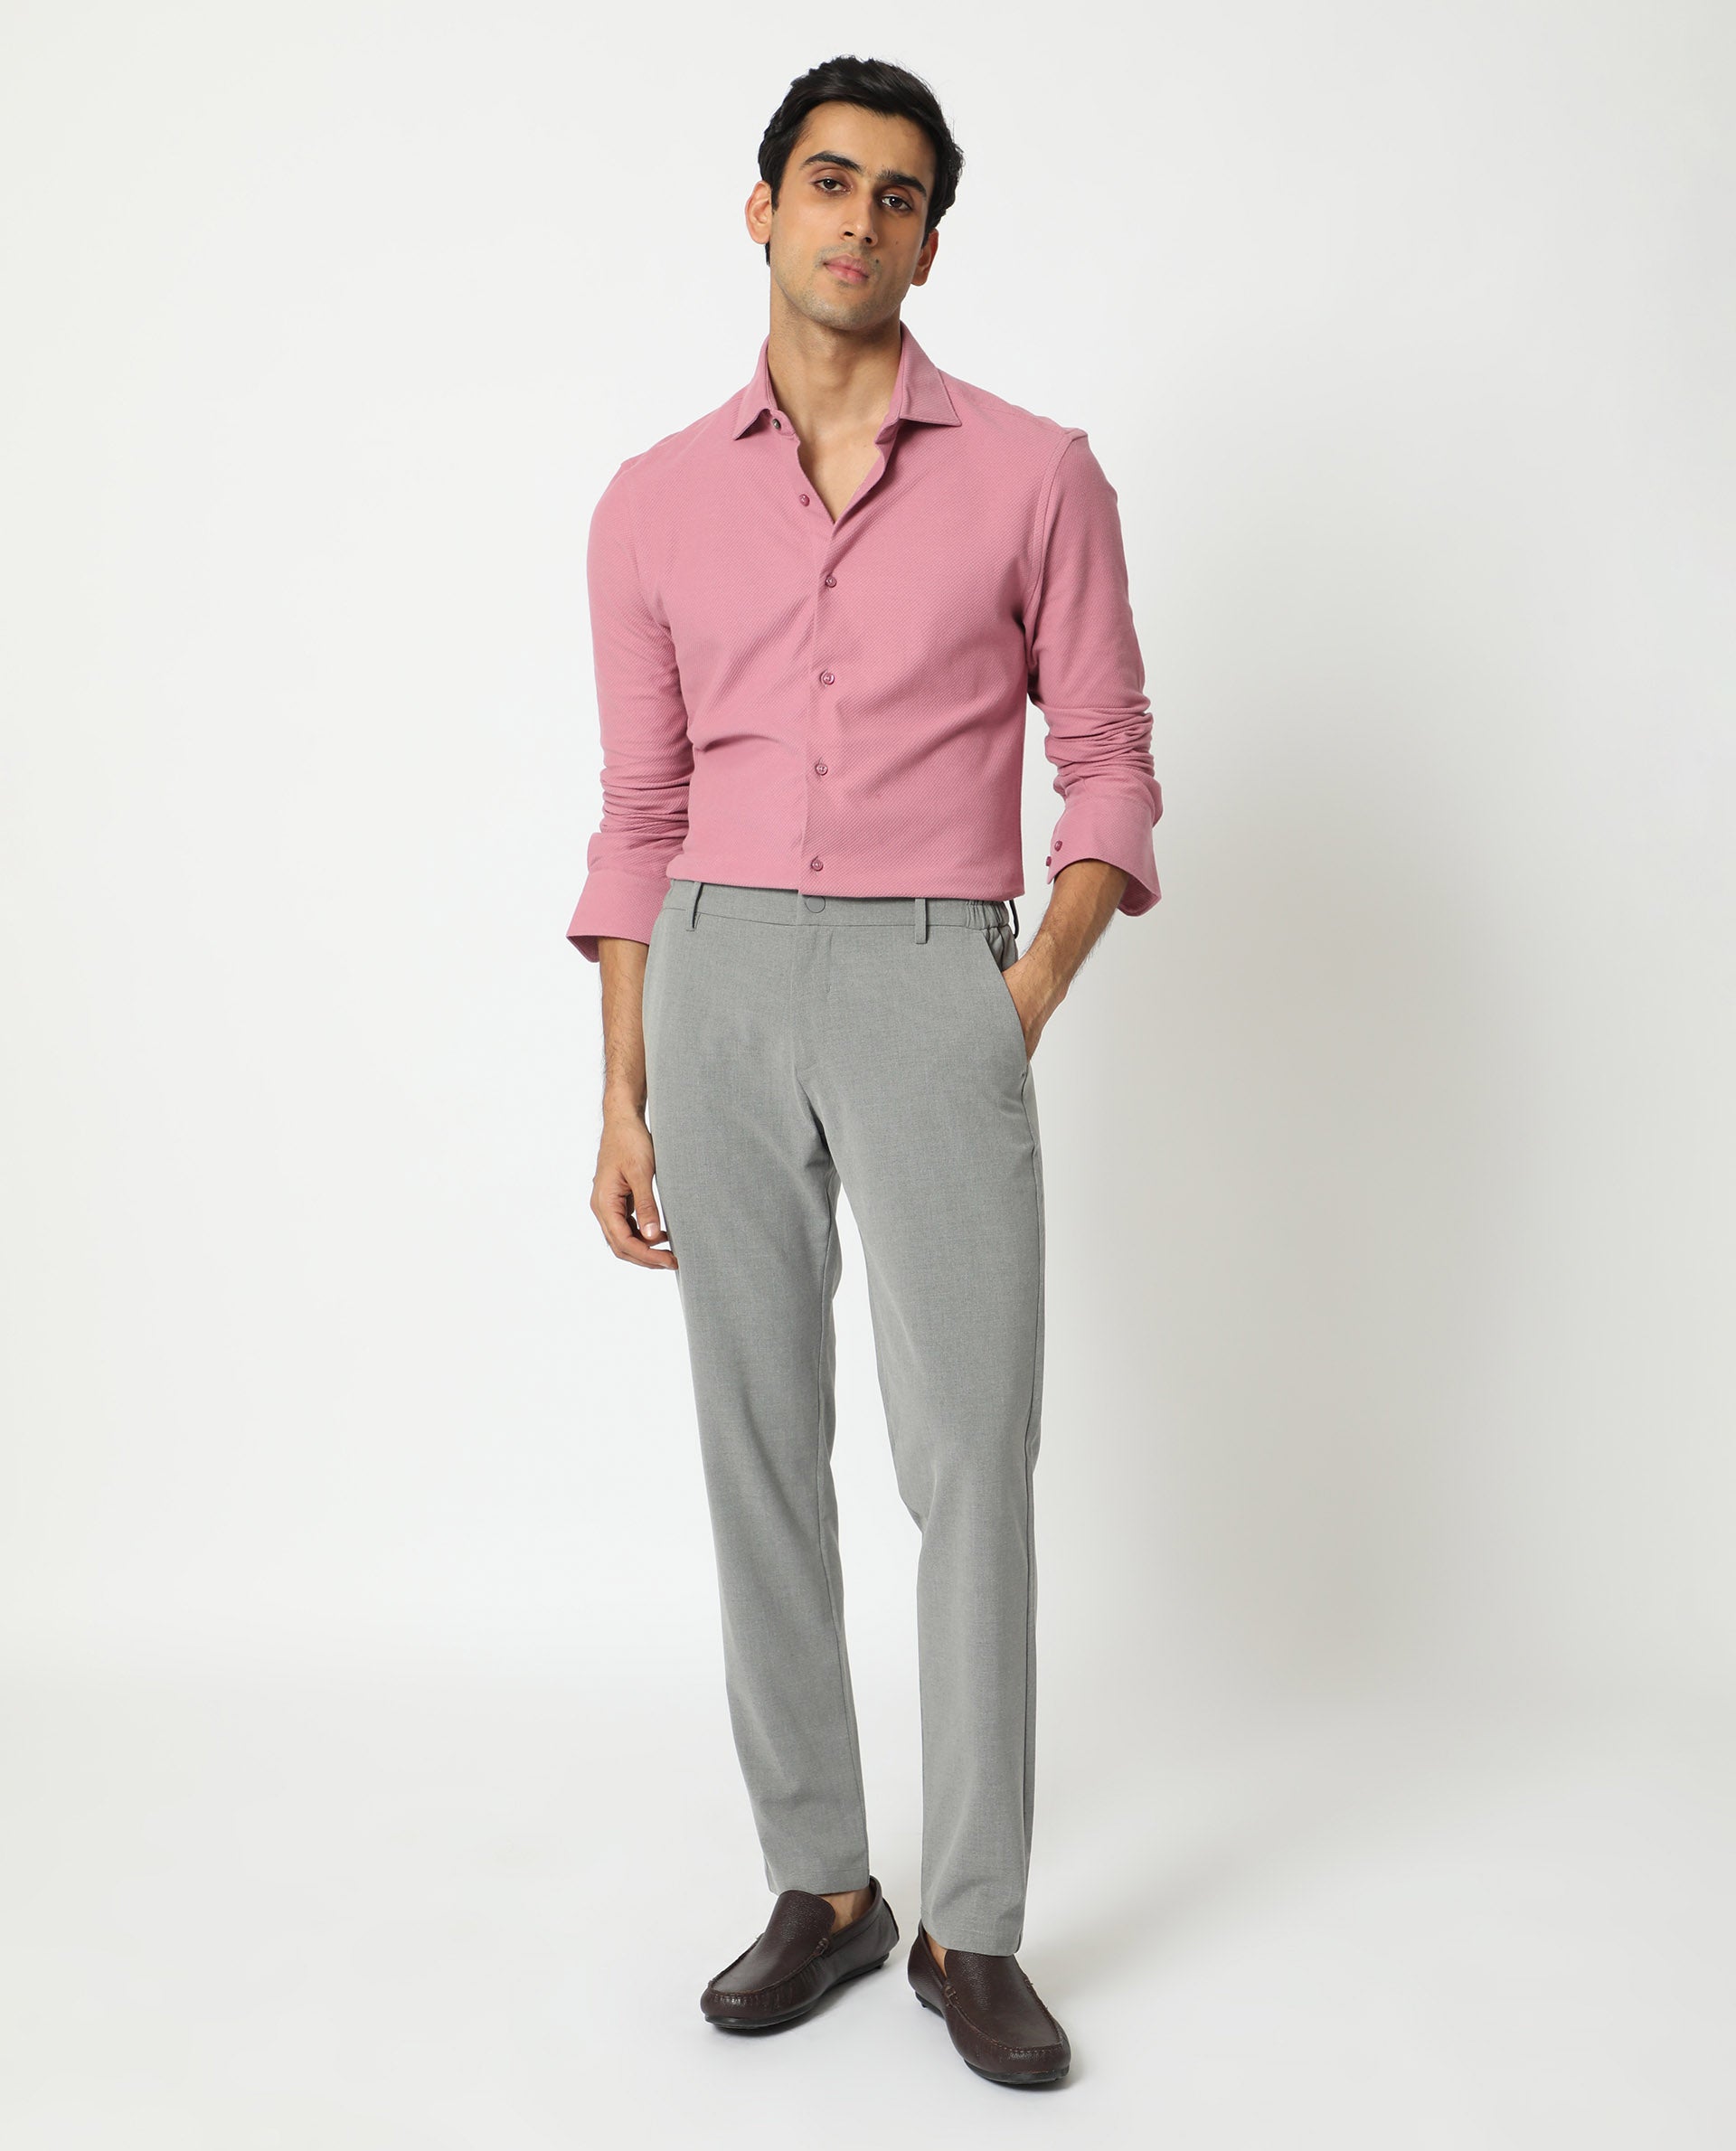 Buy The Latest Mens Clothing Online – House of Stori